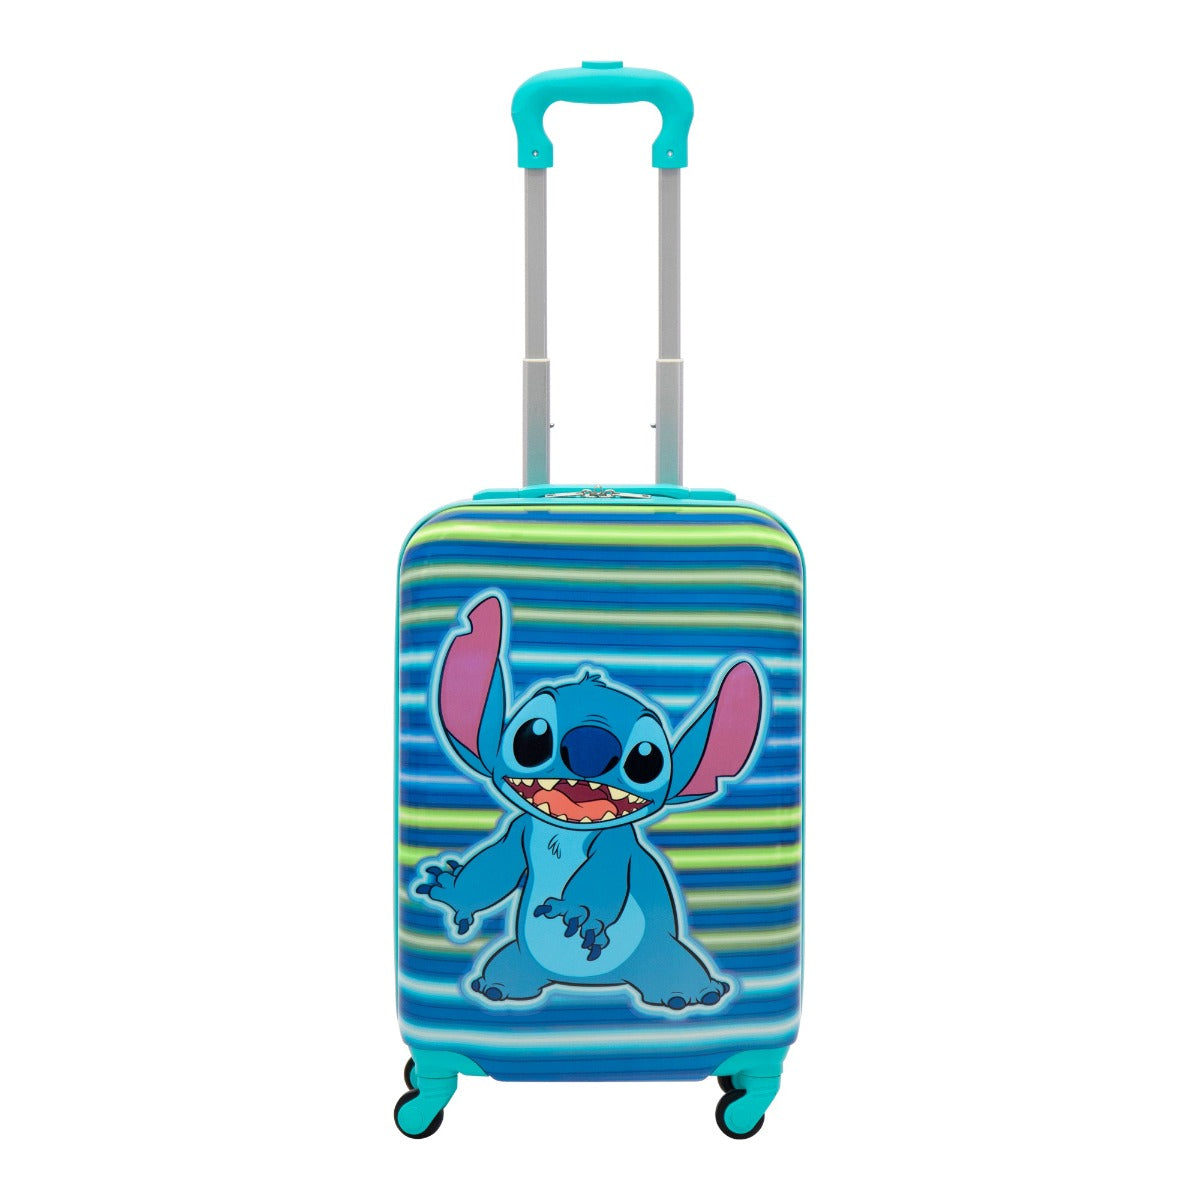 Disney Ful Stitch Neon Stripe Hardside Spinner Suitcase - Blue 21" Carry On Kids Rolling Luggage